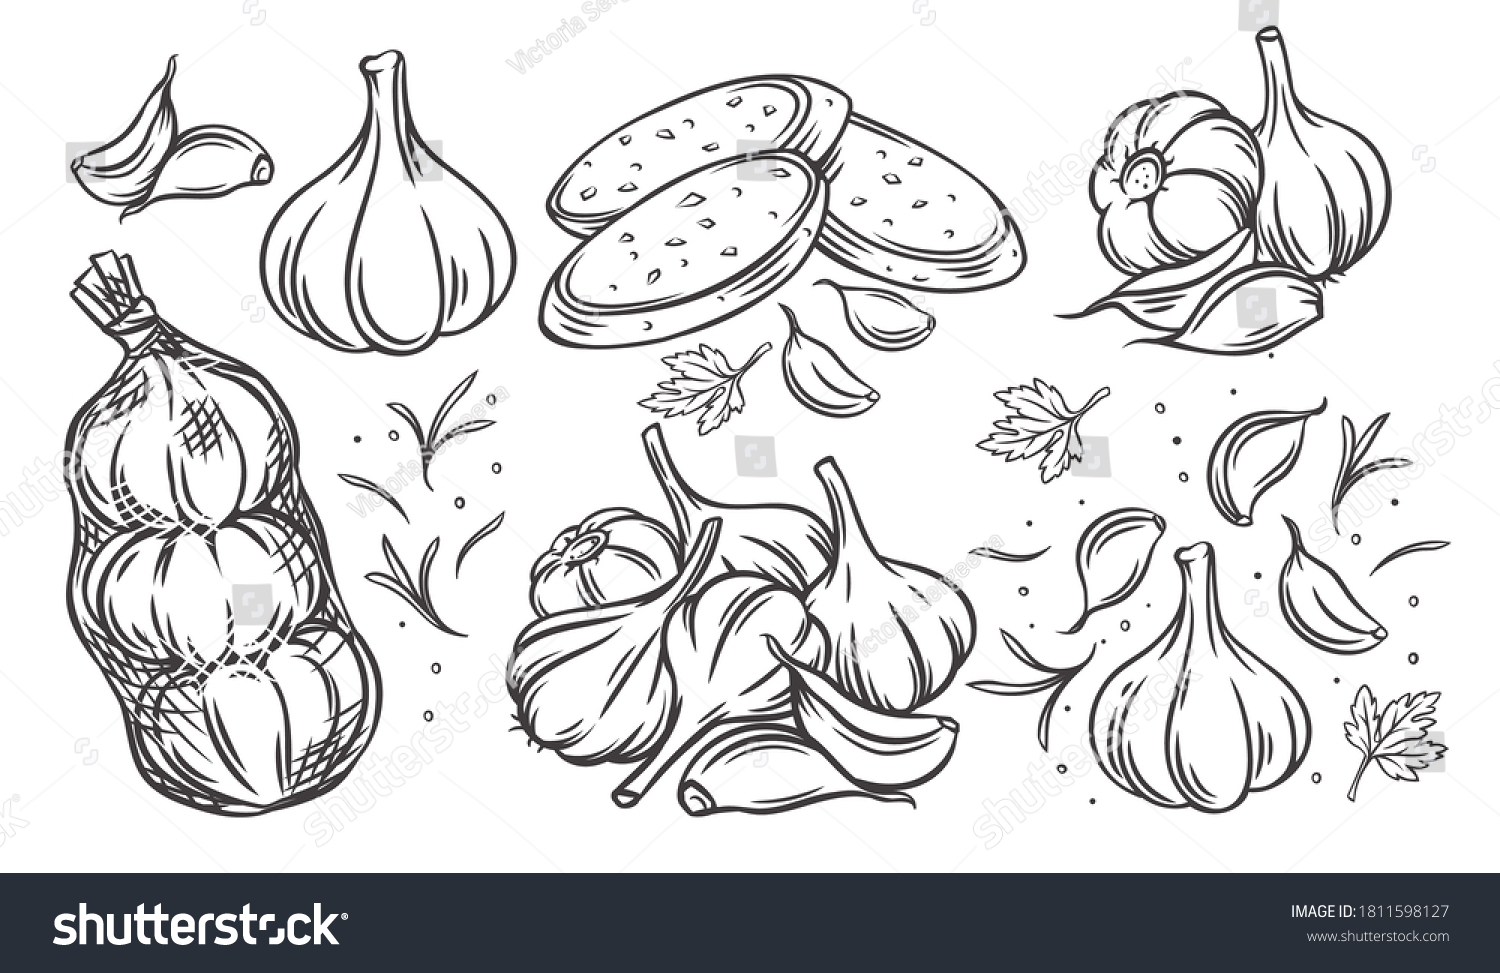 Garlic outline drawn monochrome icon set. Pile of garlic bulbs, in net bag and runchy garlic bread. Vector illustration of vegetables, farm product. #1811598127